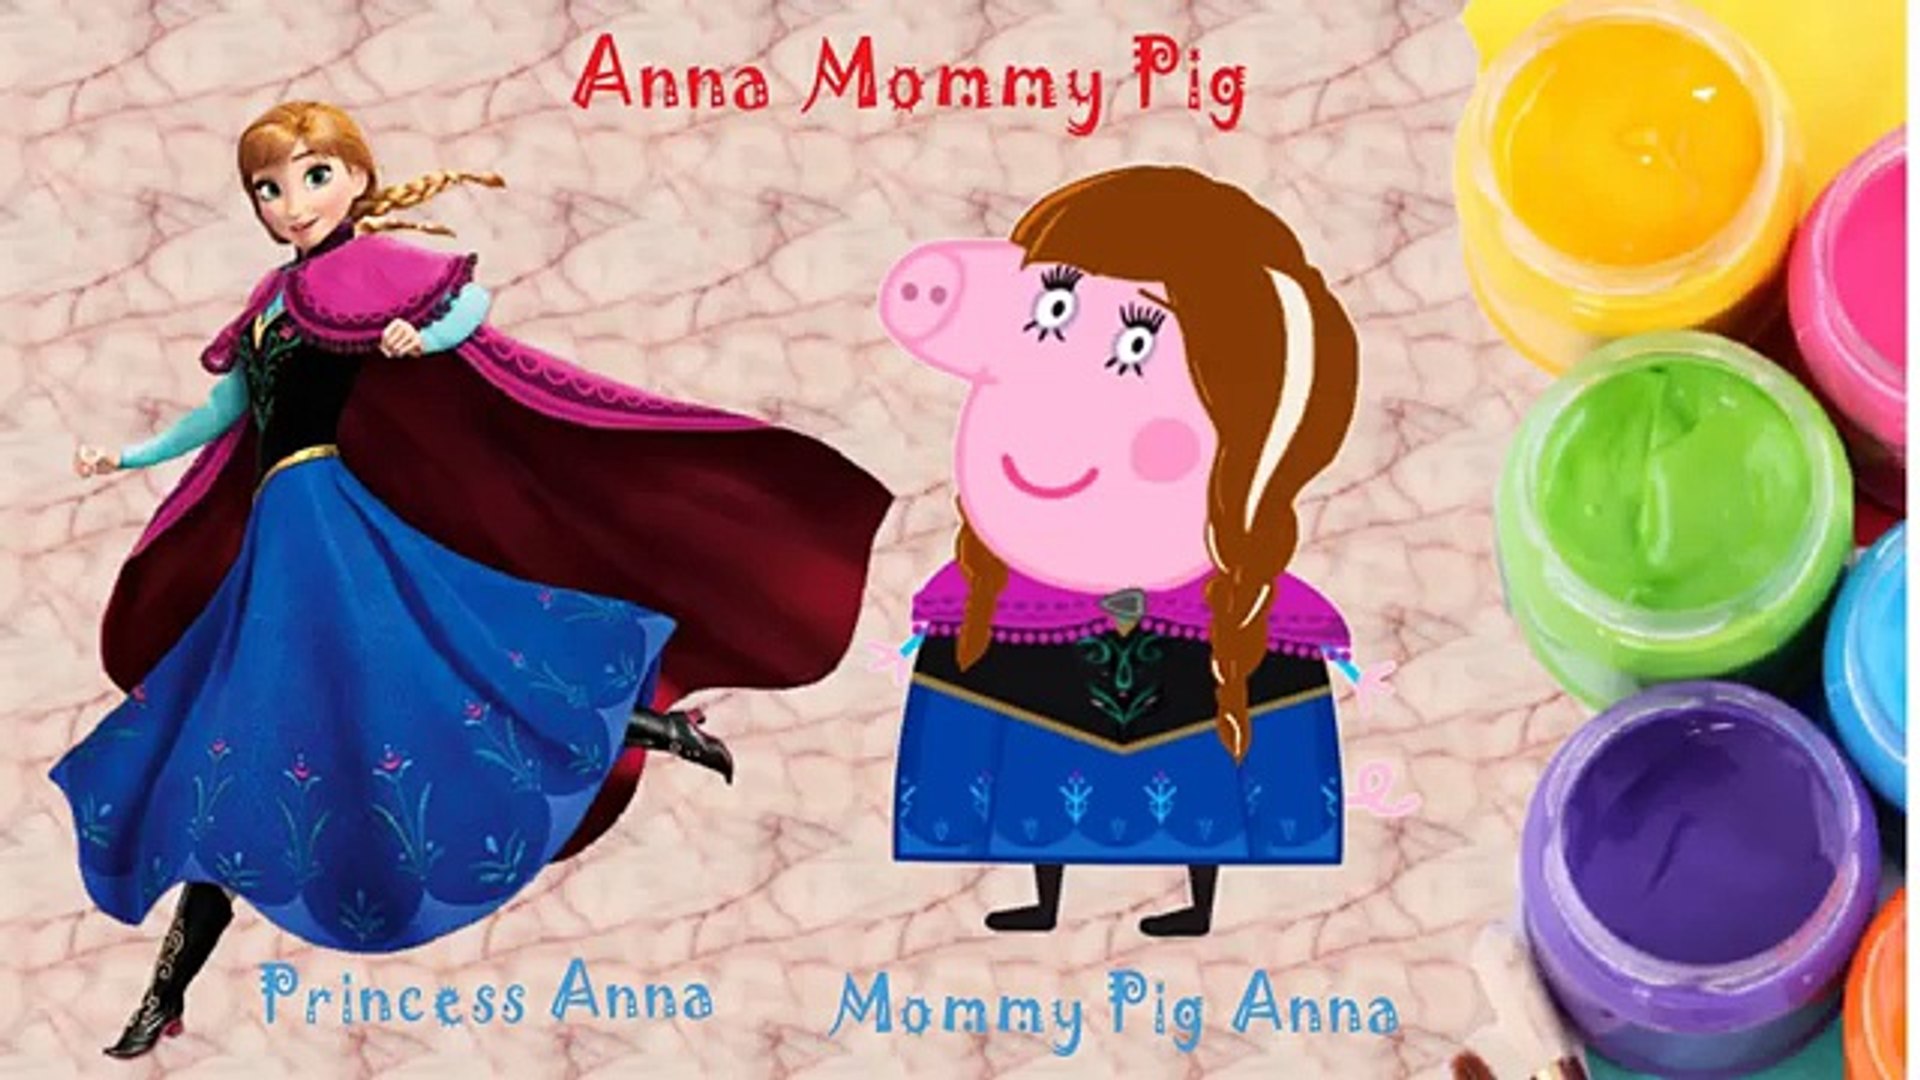 Elsa and Anna Peppa Pig Videos Finger Family Frozen Songs - Daddy Finger  Song Disney Songs - Dailymotion Video